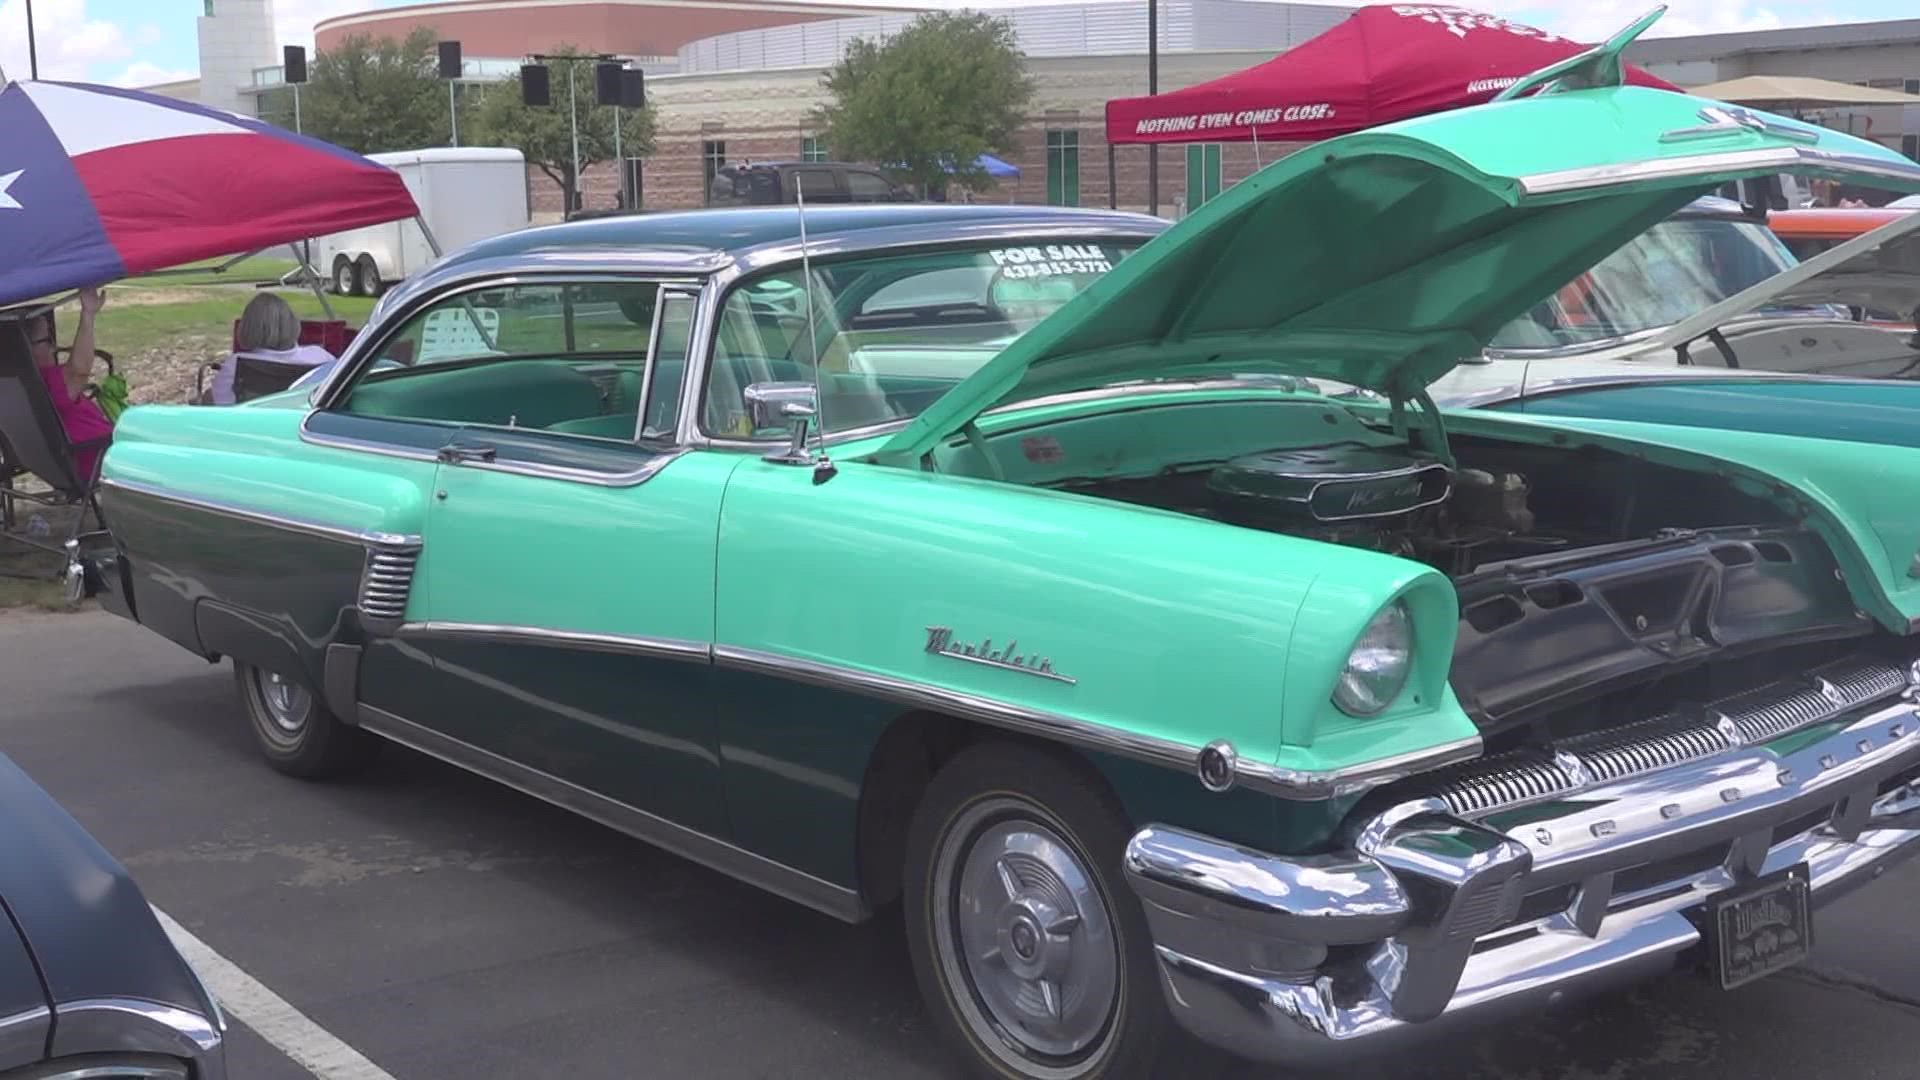 Father's day car show raises money to help people with cancer